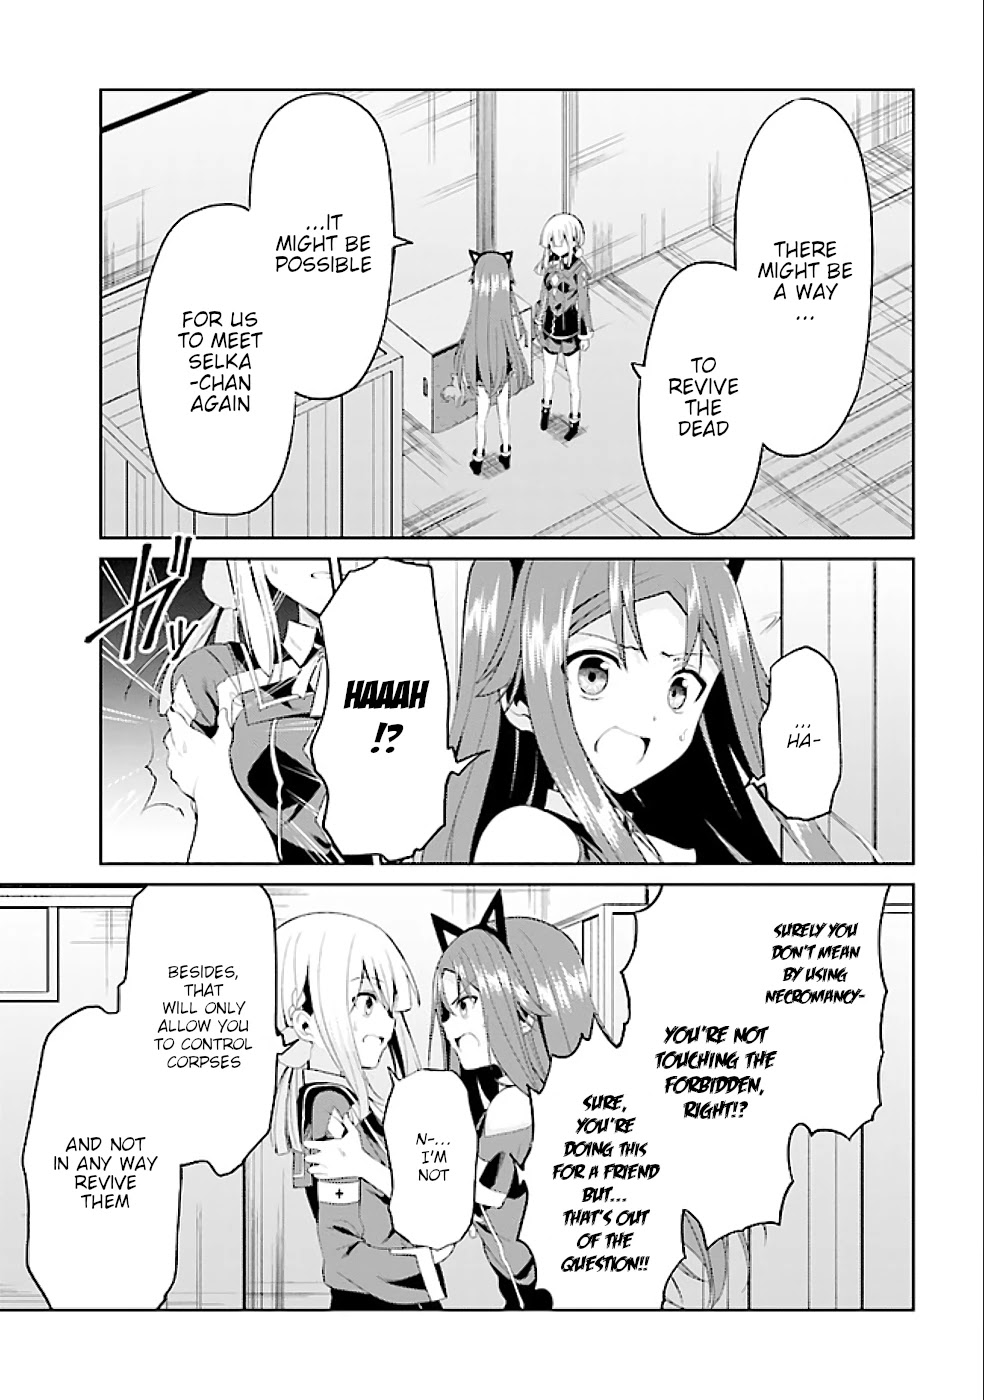 If Only It's An Ideal Daughter, Would You Even Pamper The World's Strongest? - Page 2